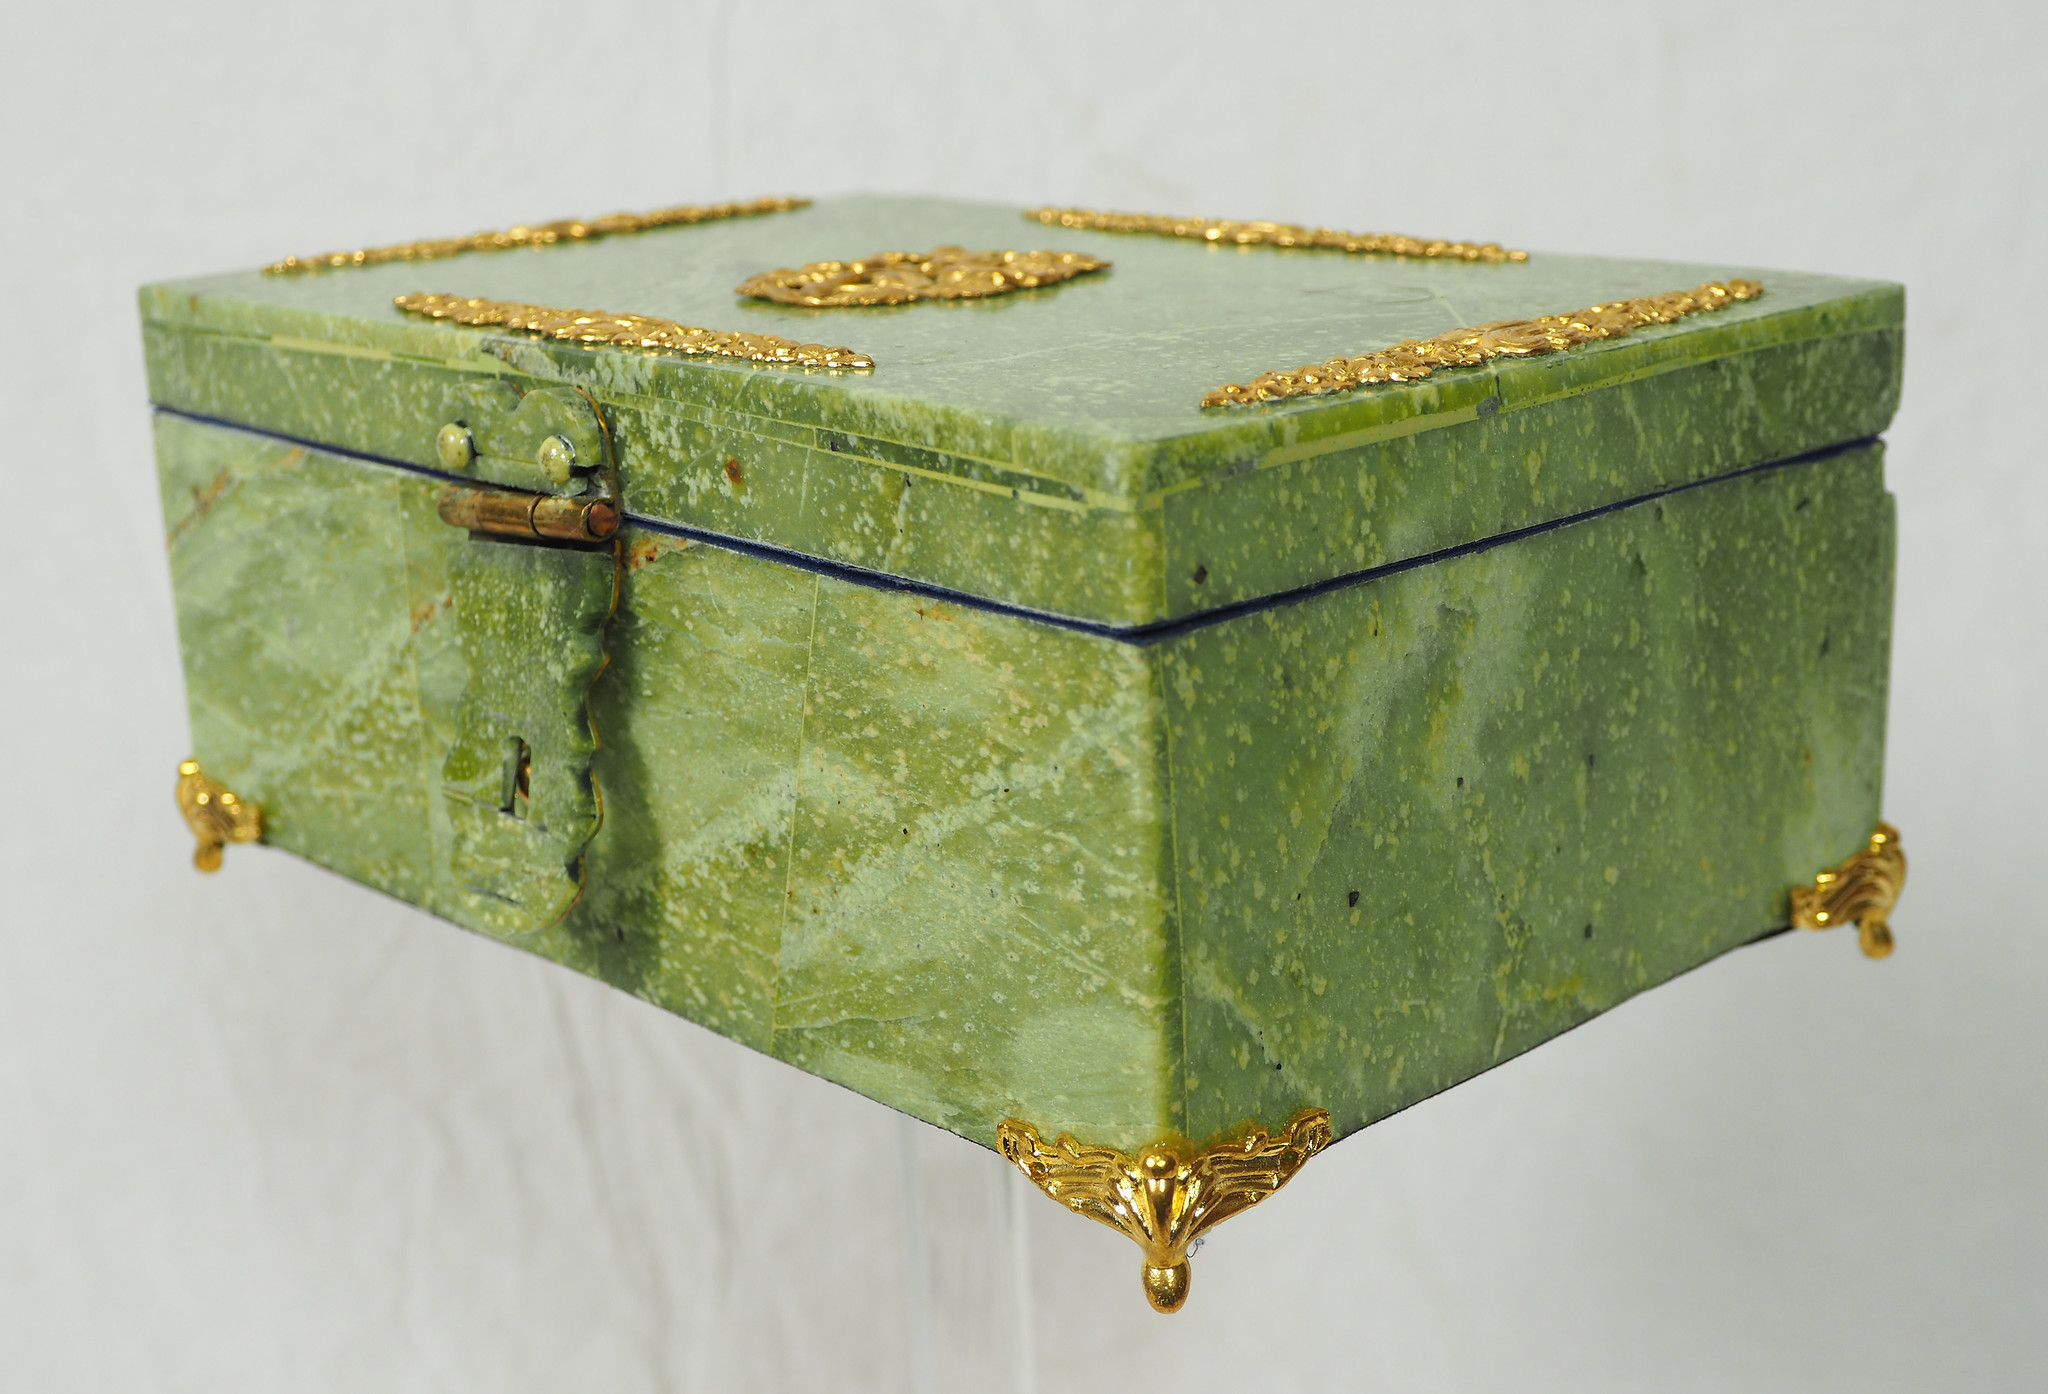 Hand Crafted  olive green serpentine Gemstone shahmaqsud box Candy Dish With Lid and Brass decoration from Afghanistan. 21/C